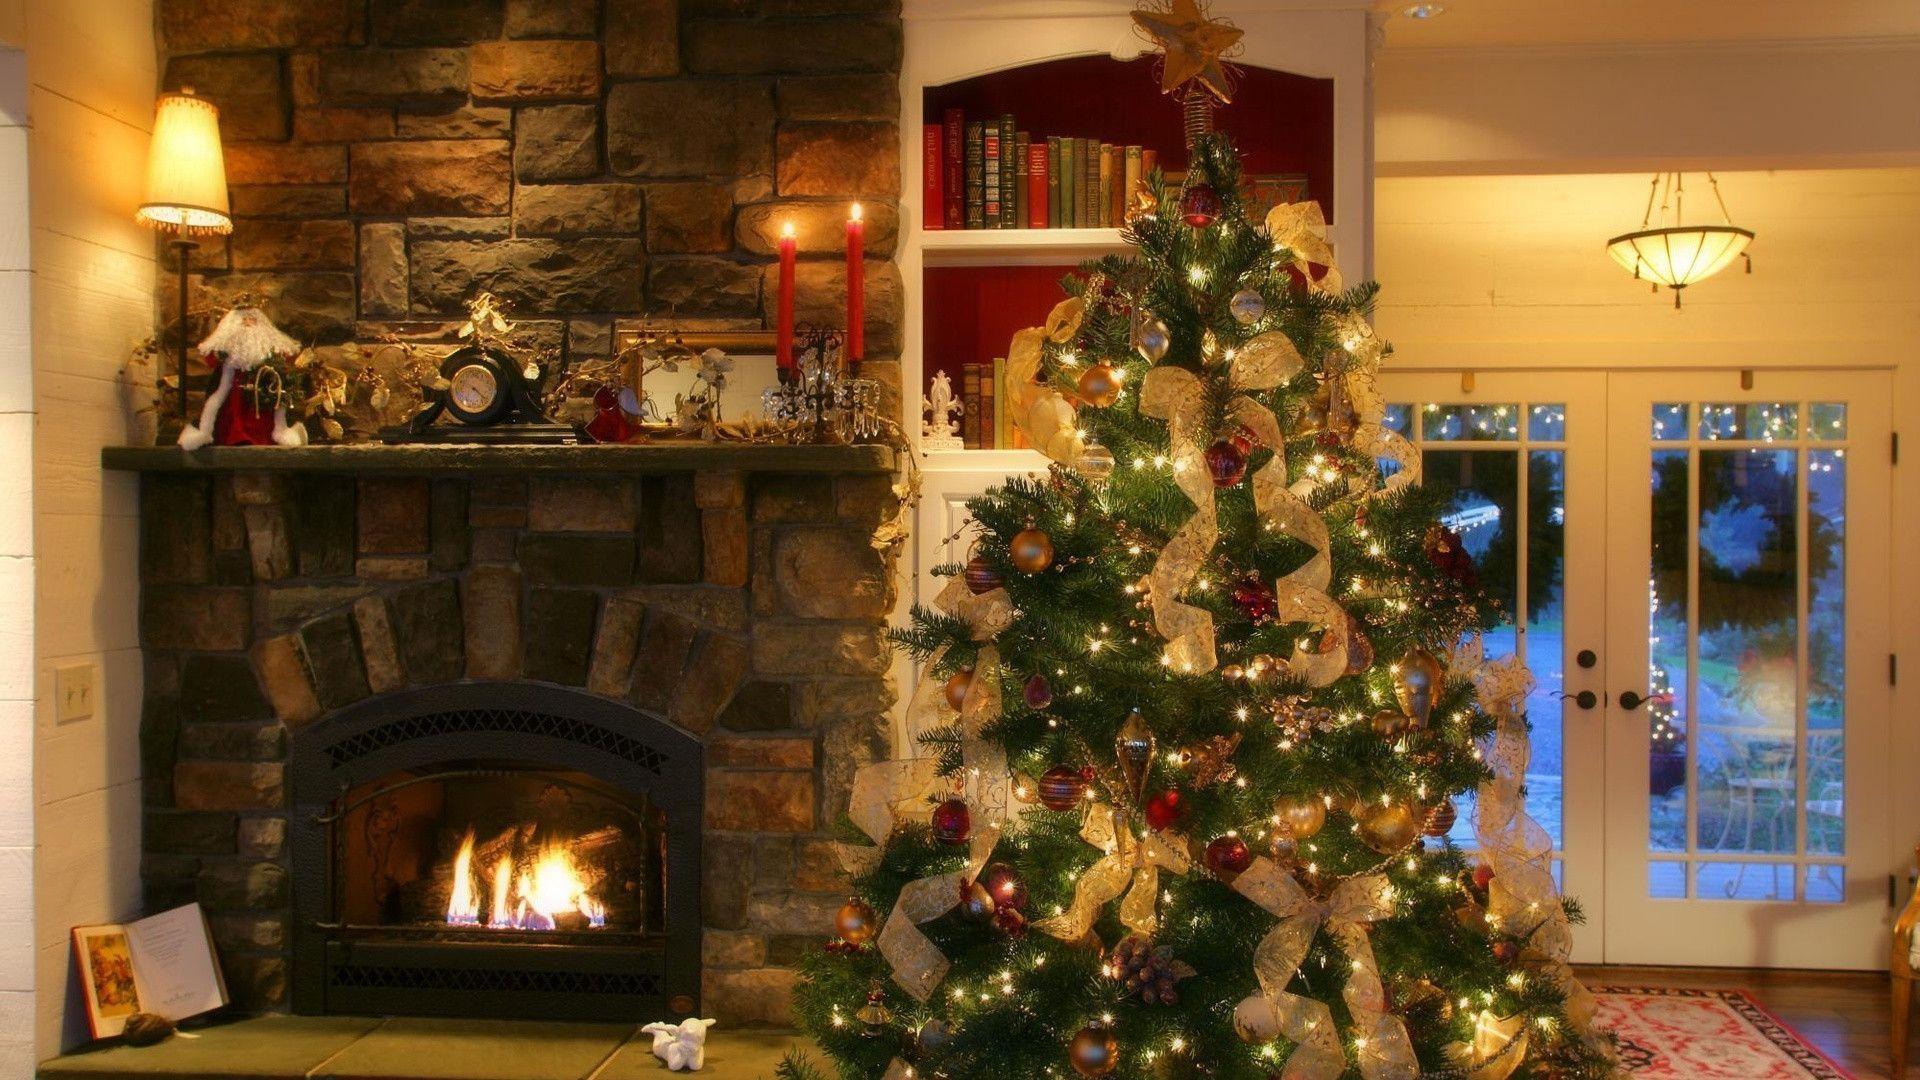 Fireplace Christmas Picture Background Wallpaper 1920x1080PX